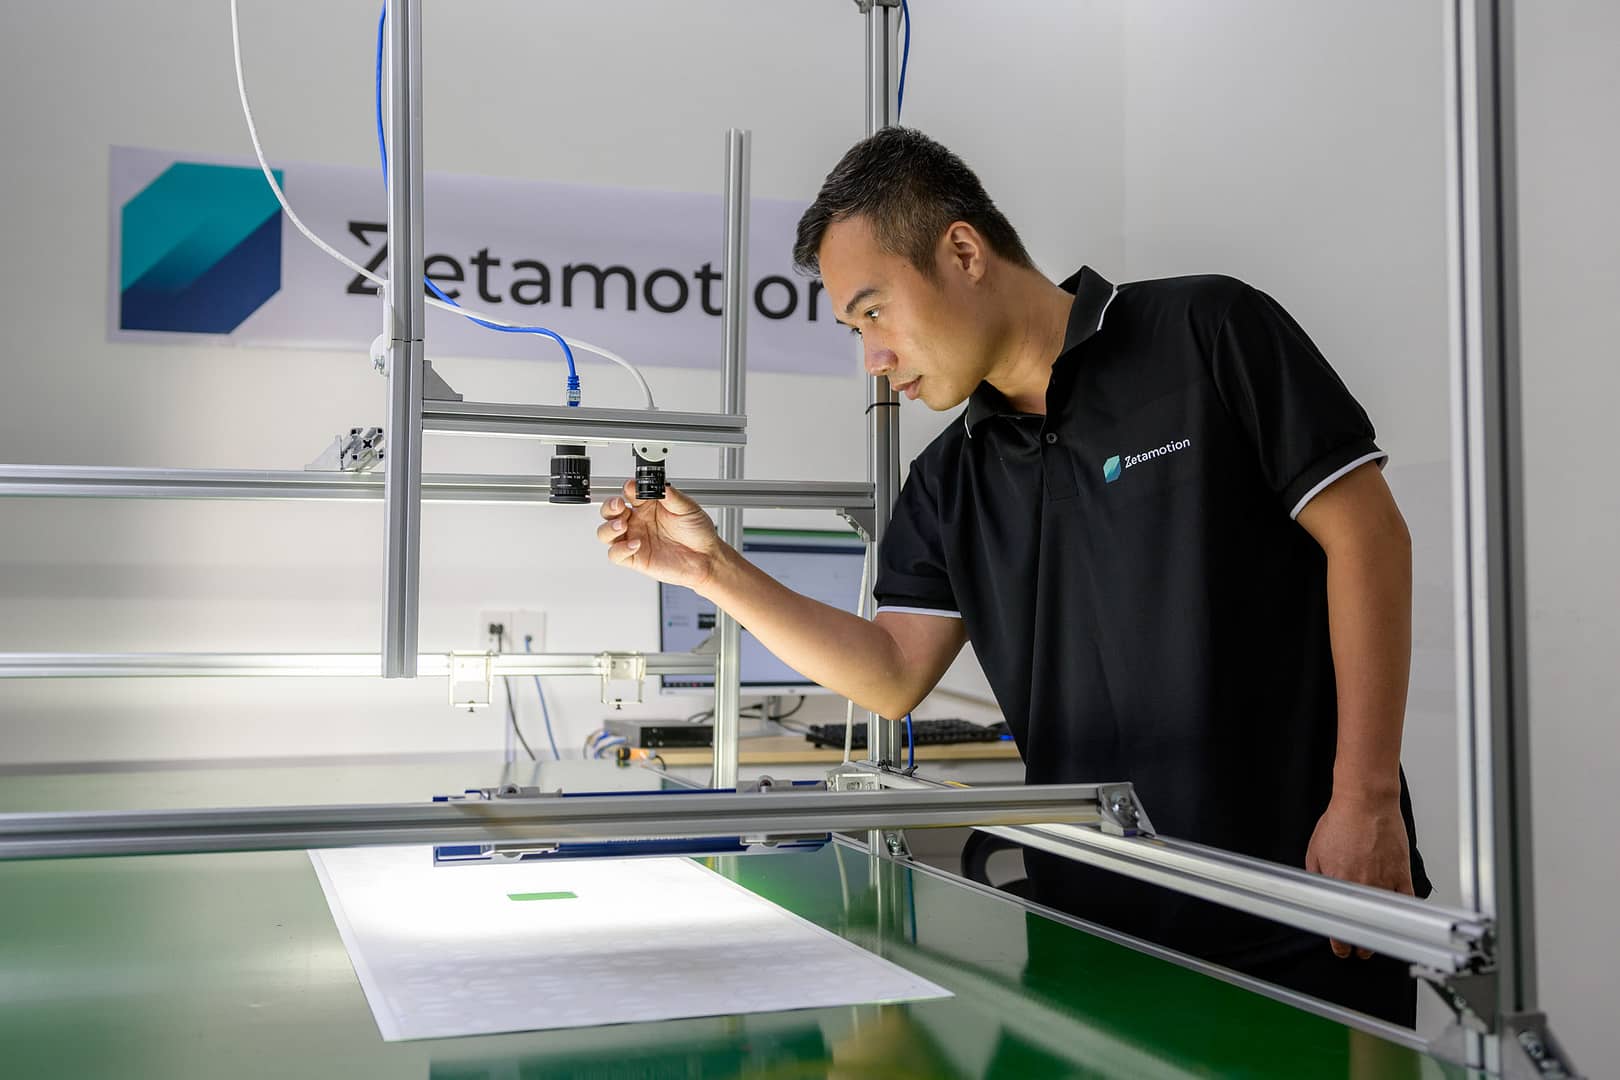 Zetamotion employee inspecting physical components of the Spectron QCaaS platform offered by Zetamotion on the production line